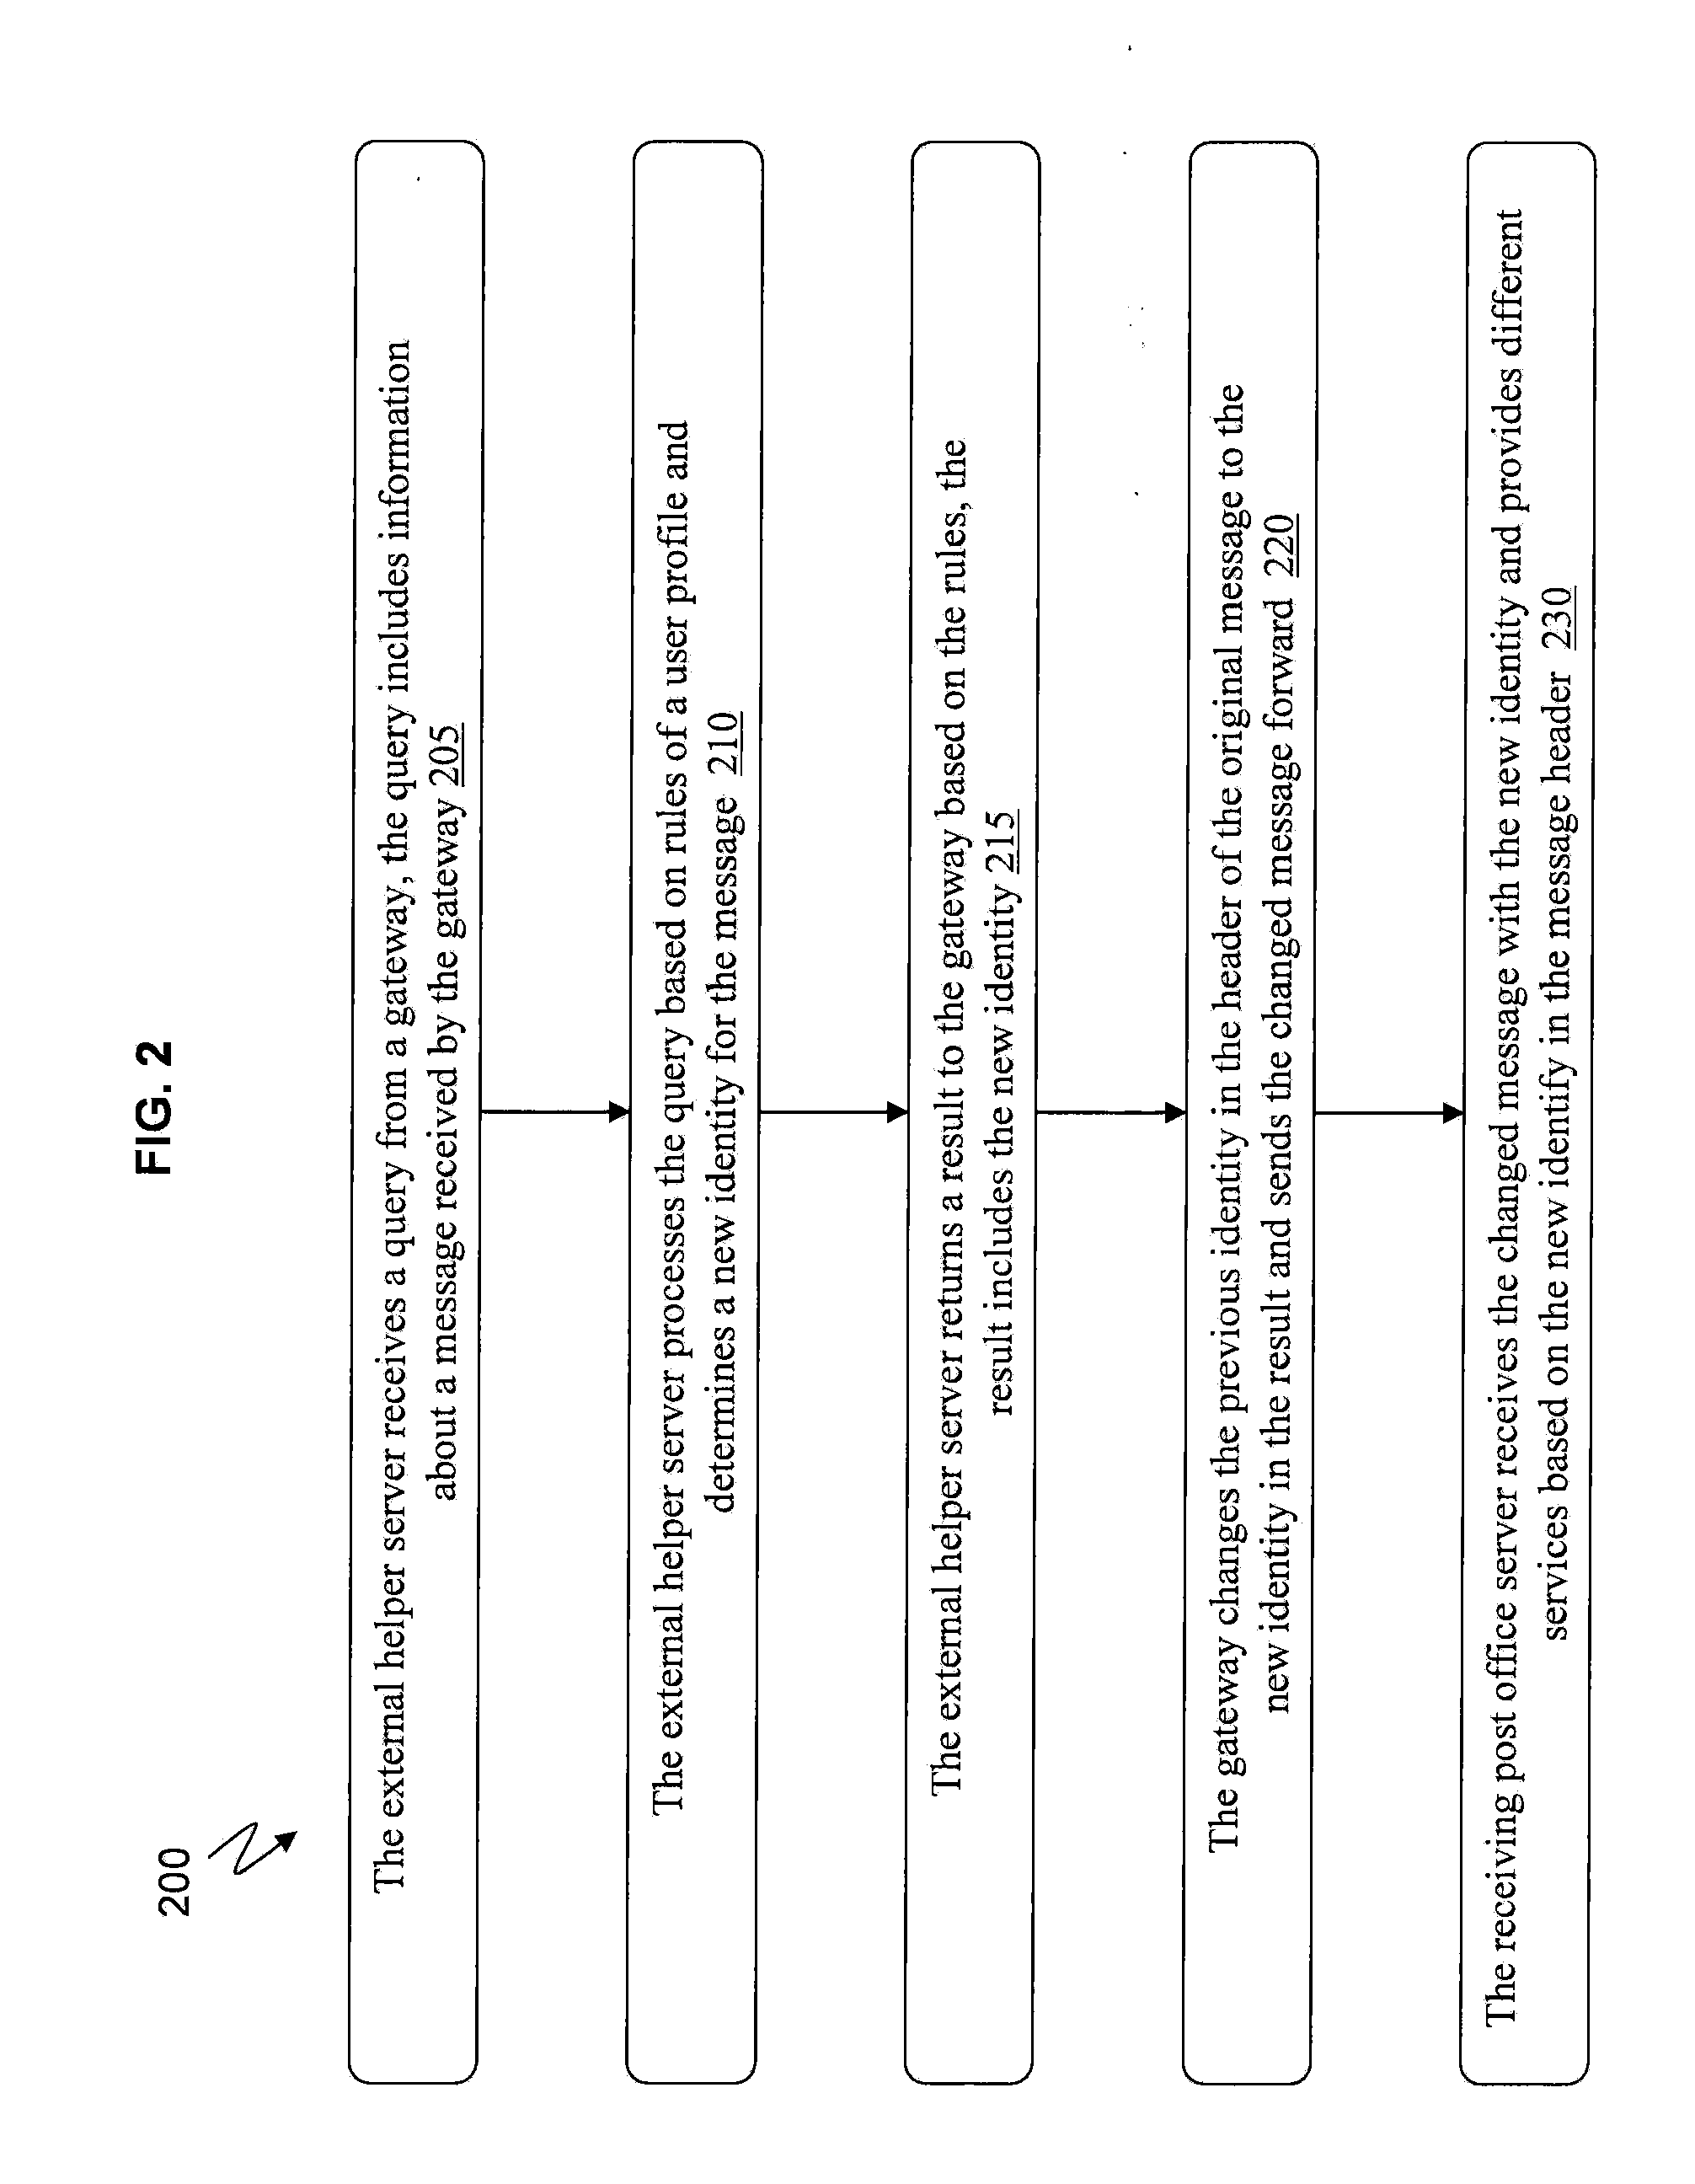 Method, device, and computer program product for differentiated treatment of emails based on network classification